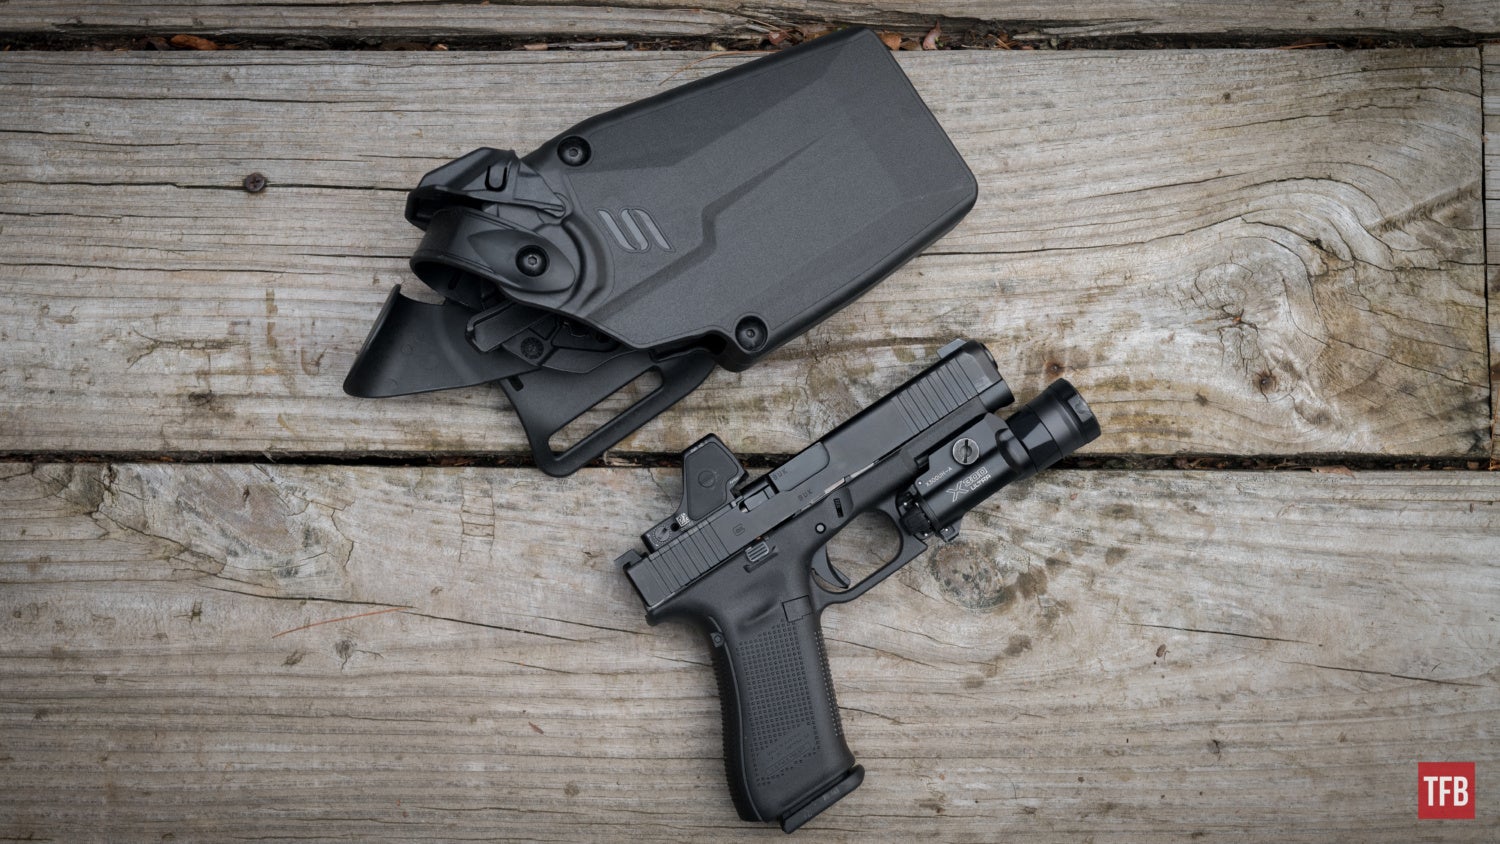 TFB REVIEW: The Trijicon RMR HD Red Dot Sight